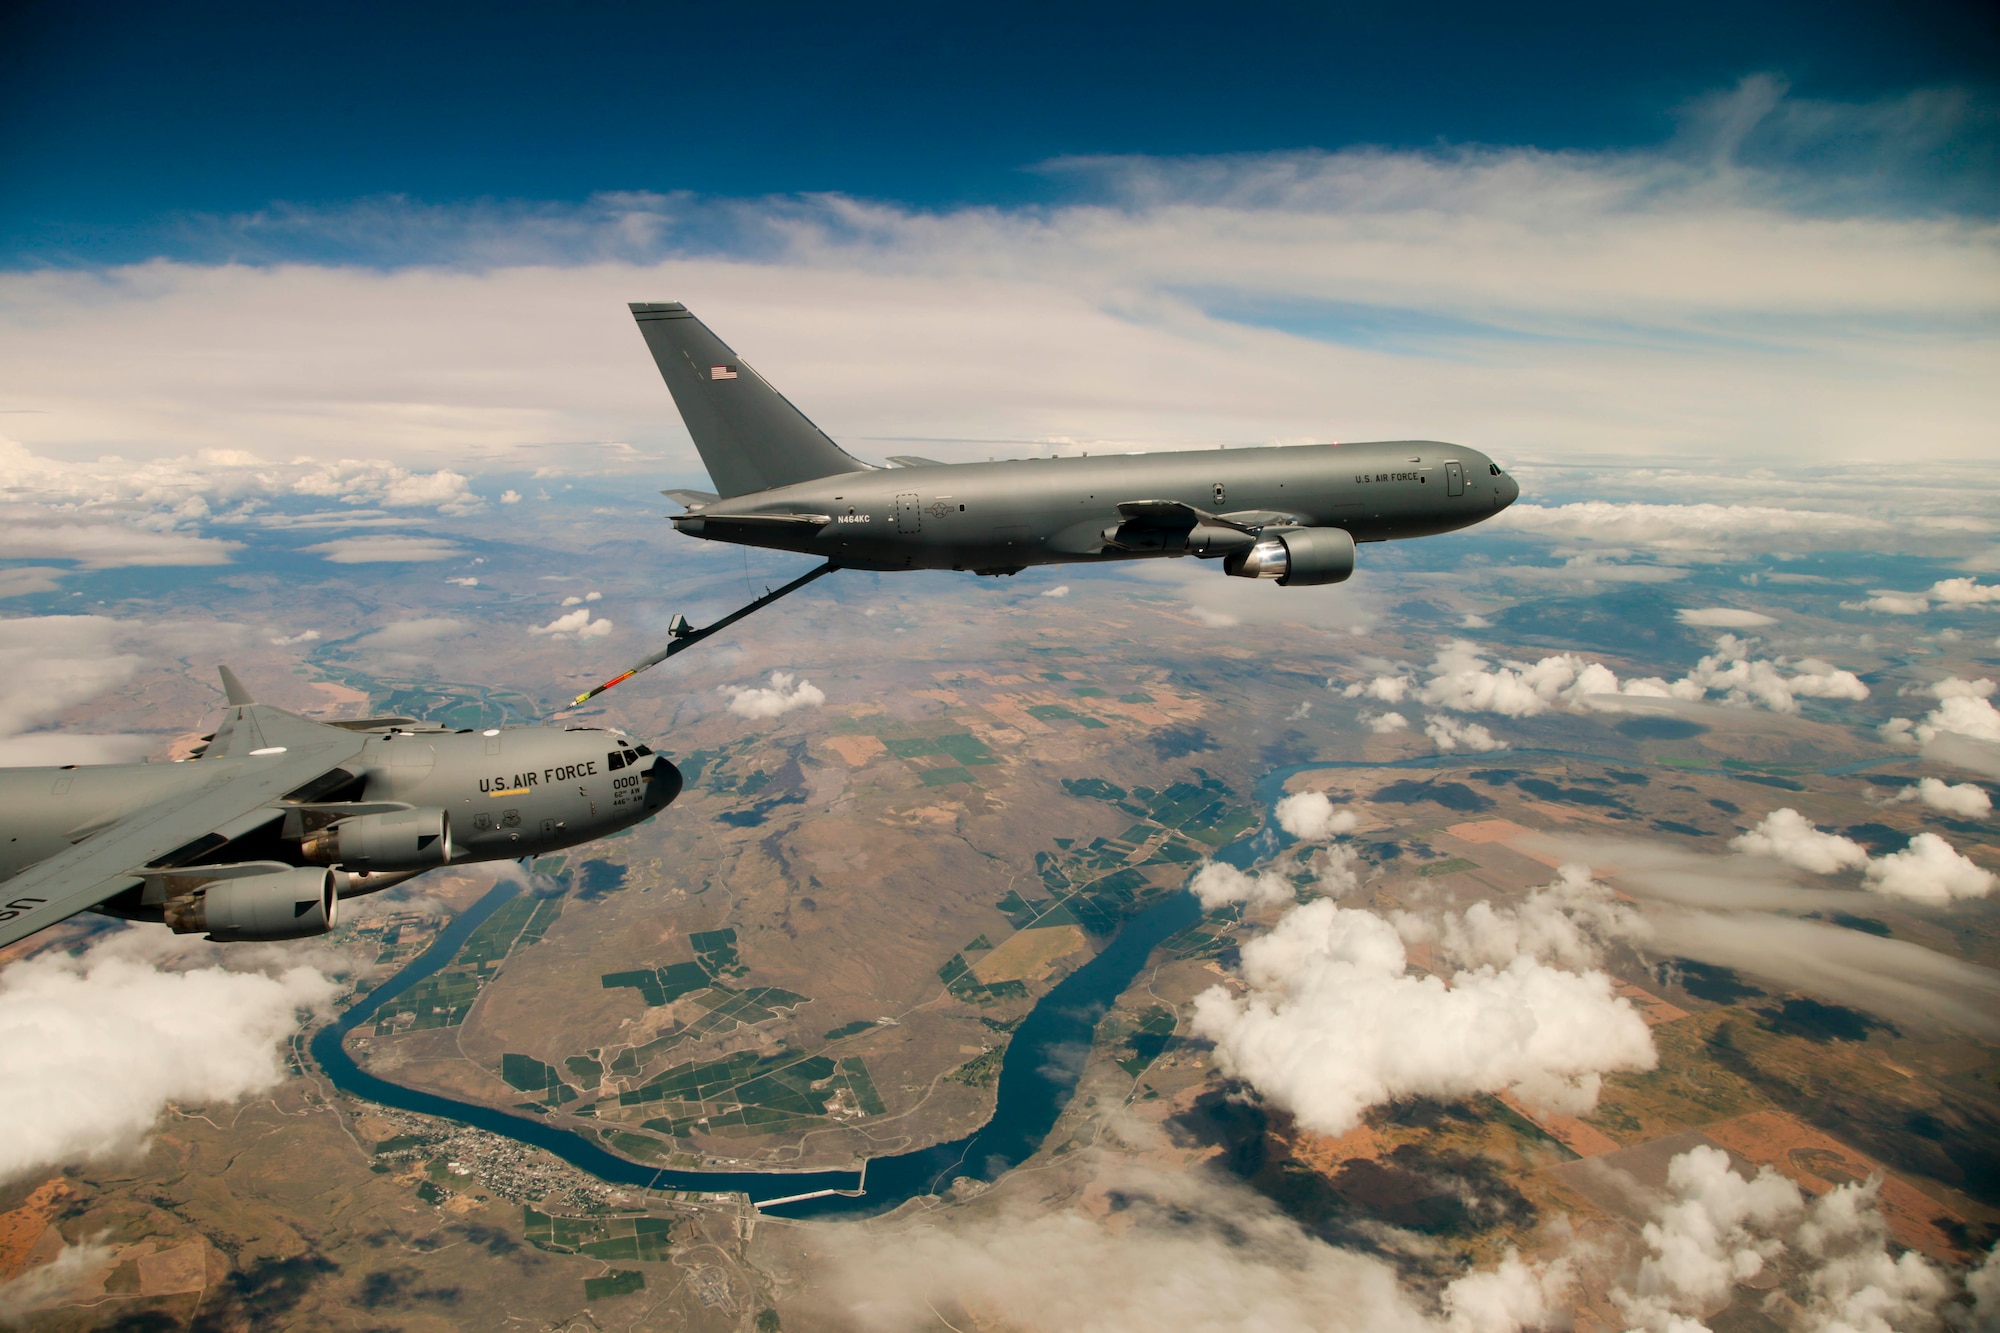 Boeing's KC-46 aerial refueling tanker conducts receiver compatibility tests with a U.S. Air Force C-17 Globemaster III from Joint Base Lewis-McChord as part of Test 003-06. The event marks the nearing completion of "Milestone C" in the new tanker's developmental testing stage. (U.S. Air Force photo by Christopher Okula)